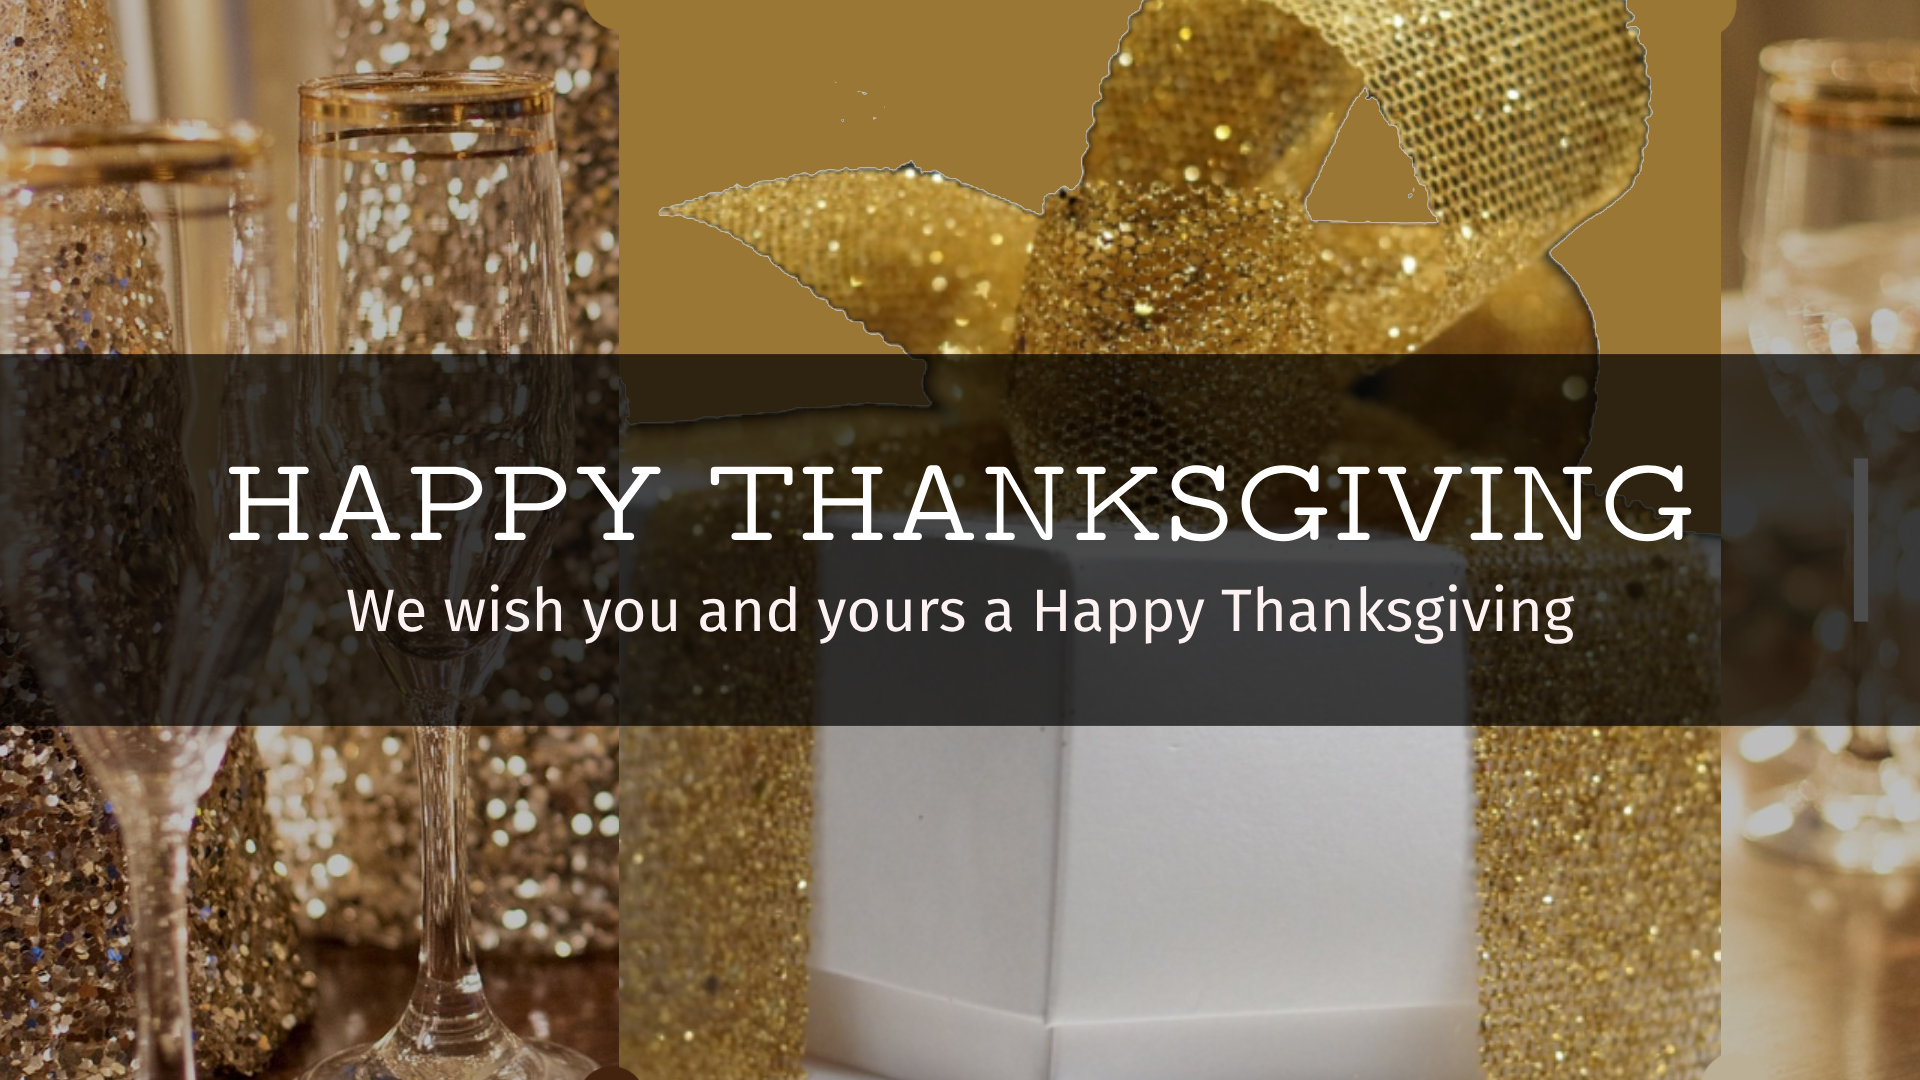 WISHING YOU A HAPPY THANKSGIVING